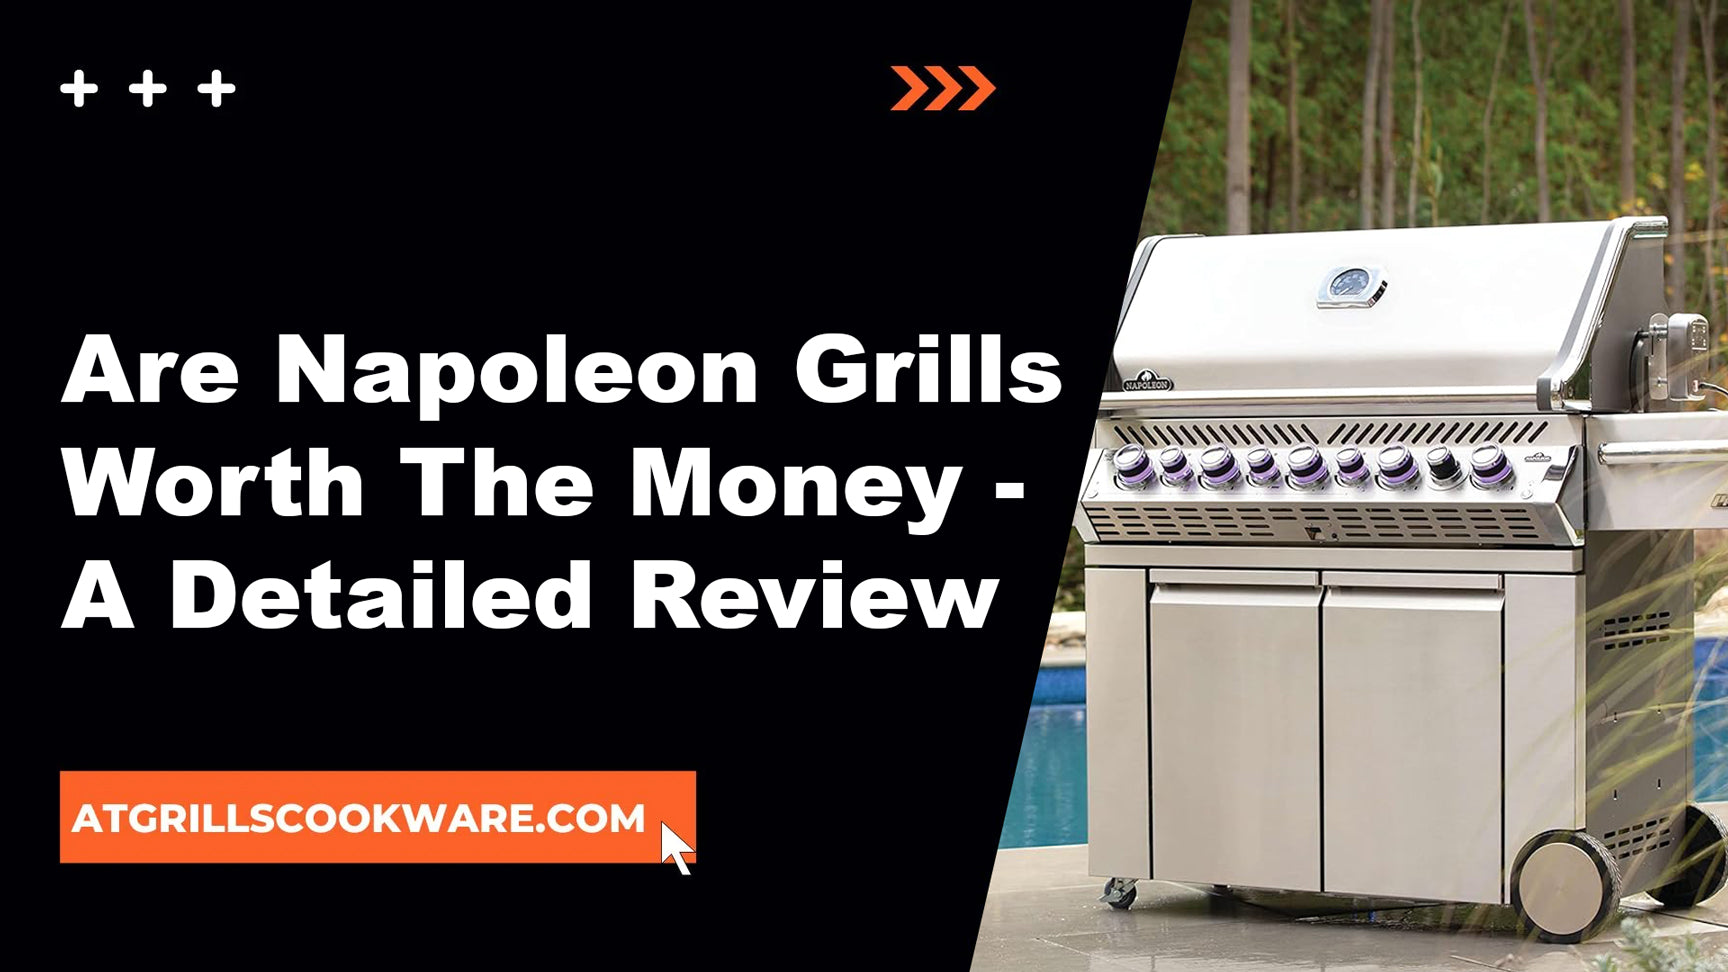 Are Napoleon Grills Worth The Money - A Detailed Review